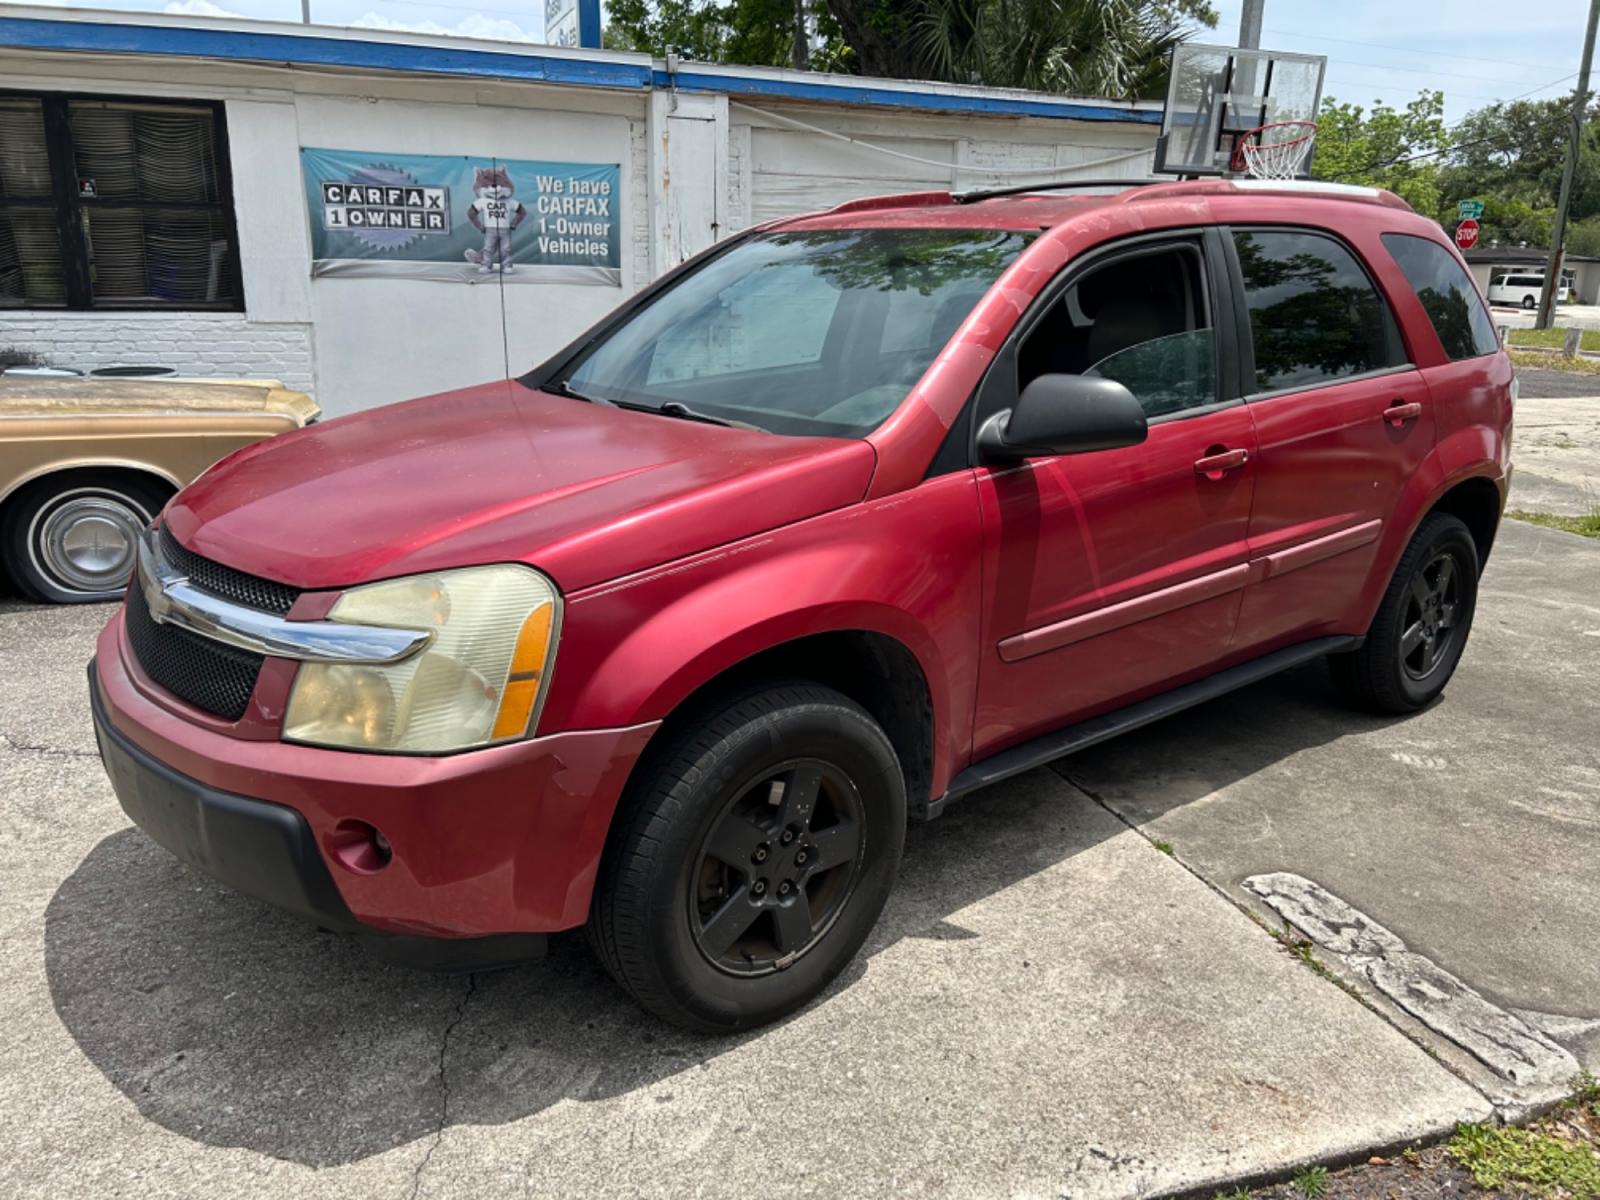 2005 Chevrolet Equinox (2CNDL63F156) , located at 1758 Cassat Ave., Jacksonville, FL, 32210, (904) 384-2799, 30.286720, -81.730652 - LOW MILEAGE!!!!! ONLY 86,523 MILES!!!!! 2005 CHEVROLET EQUINOX LT MODEL LEATHER 4-DOOR AUTOMATIC TRANSMSSION ICE COLD AIR CONDITIONING RUNS GREAT $3900.00 DON'T HESITATE OR THIS ONE WILL BE GONE CALL US @ 904-384-2799 - Photo #1